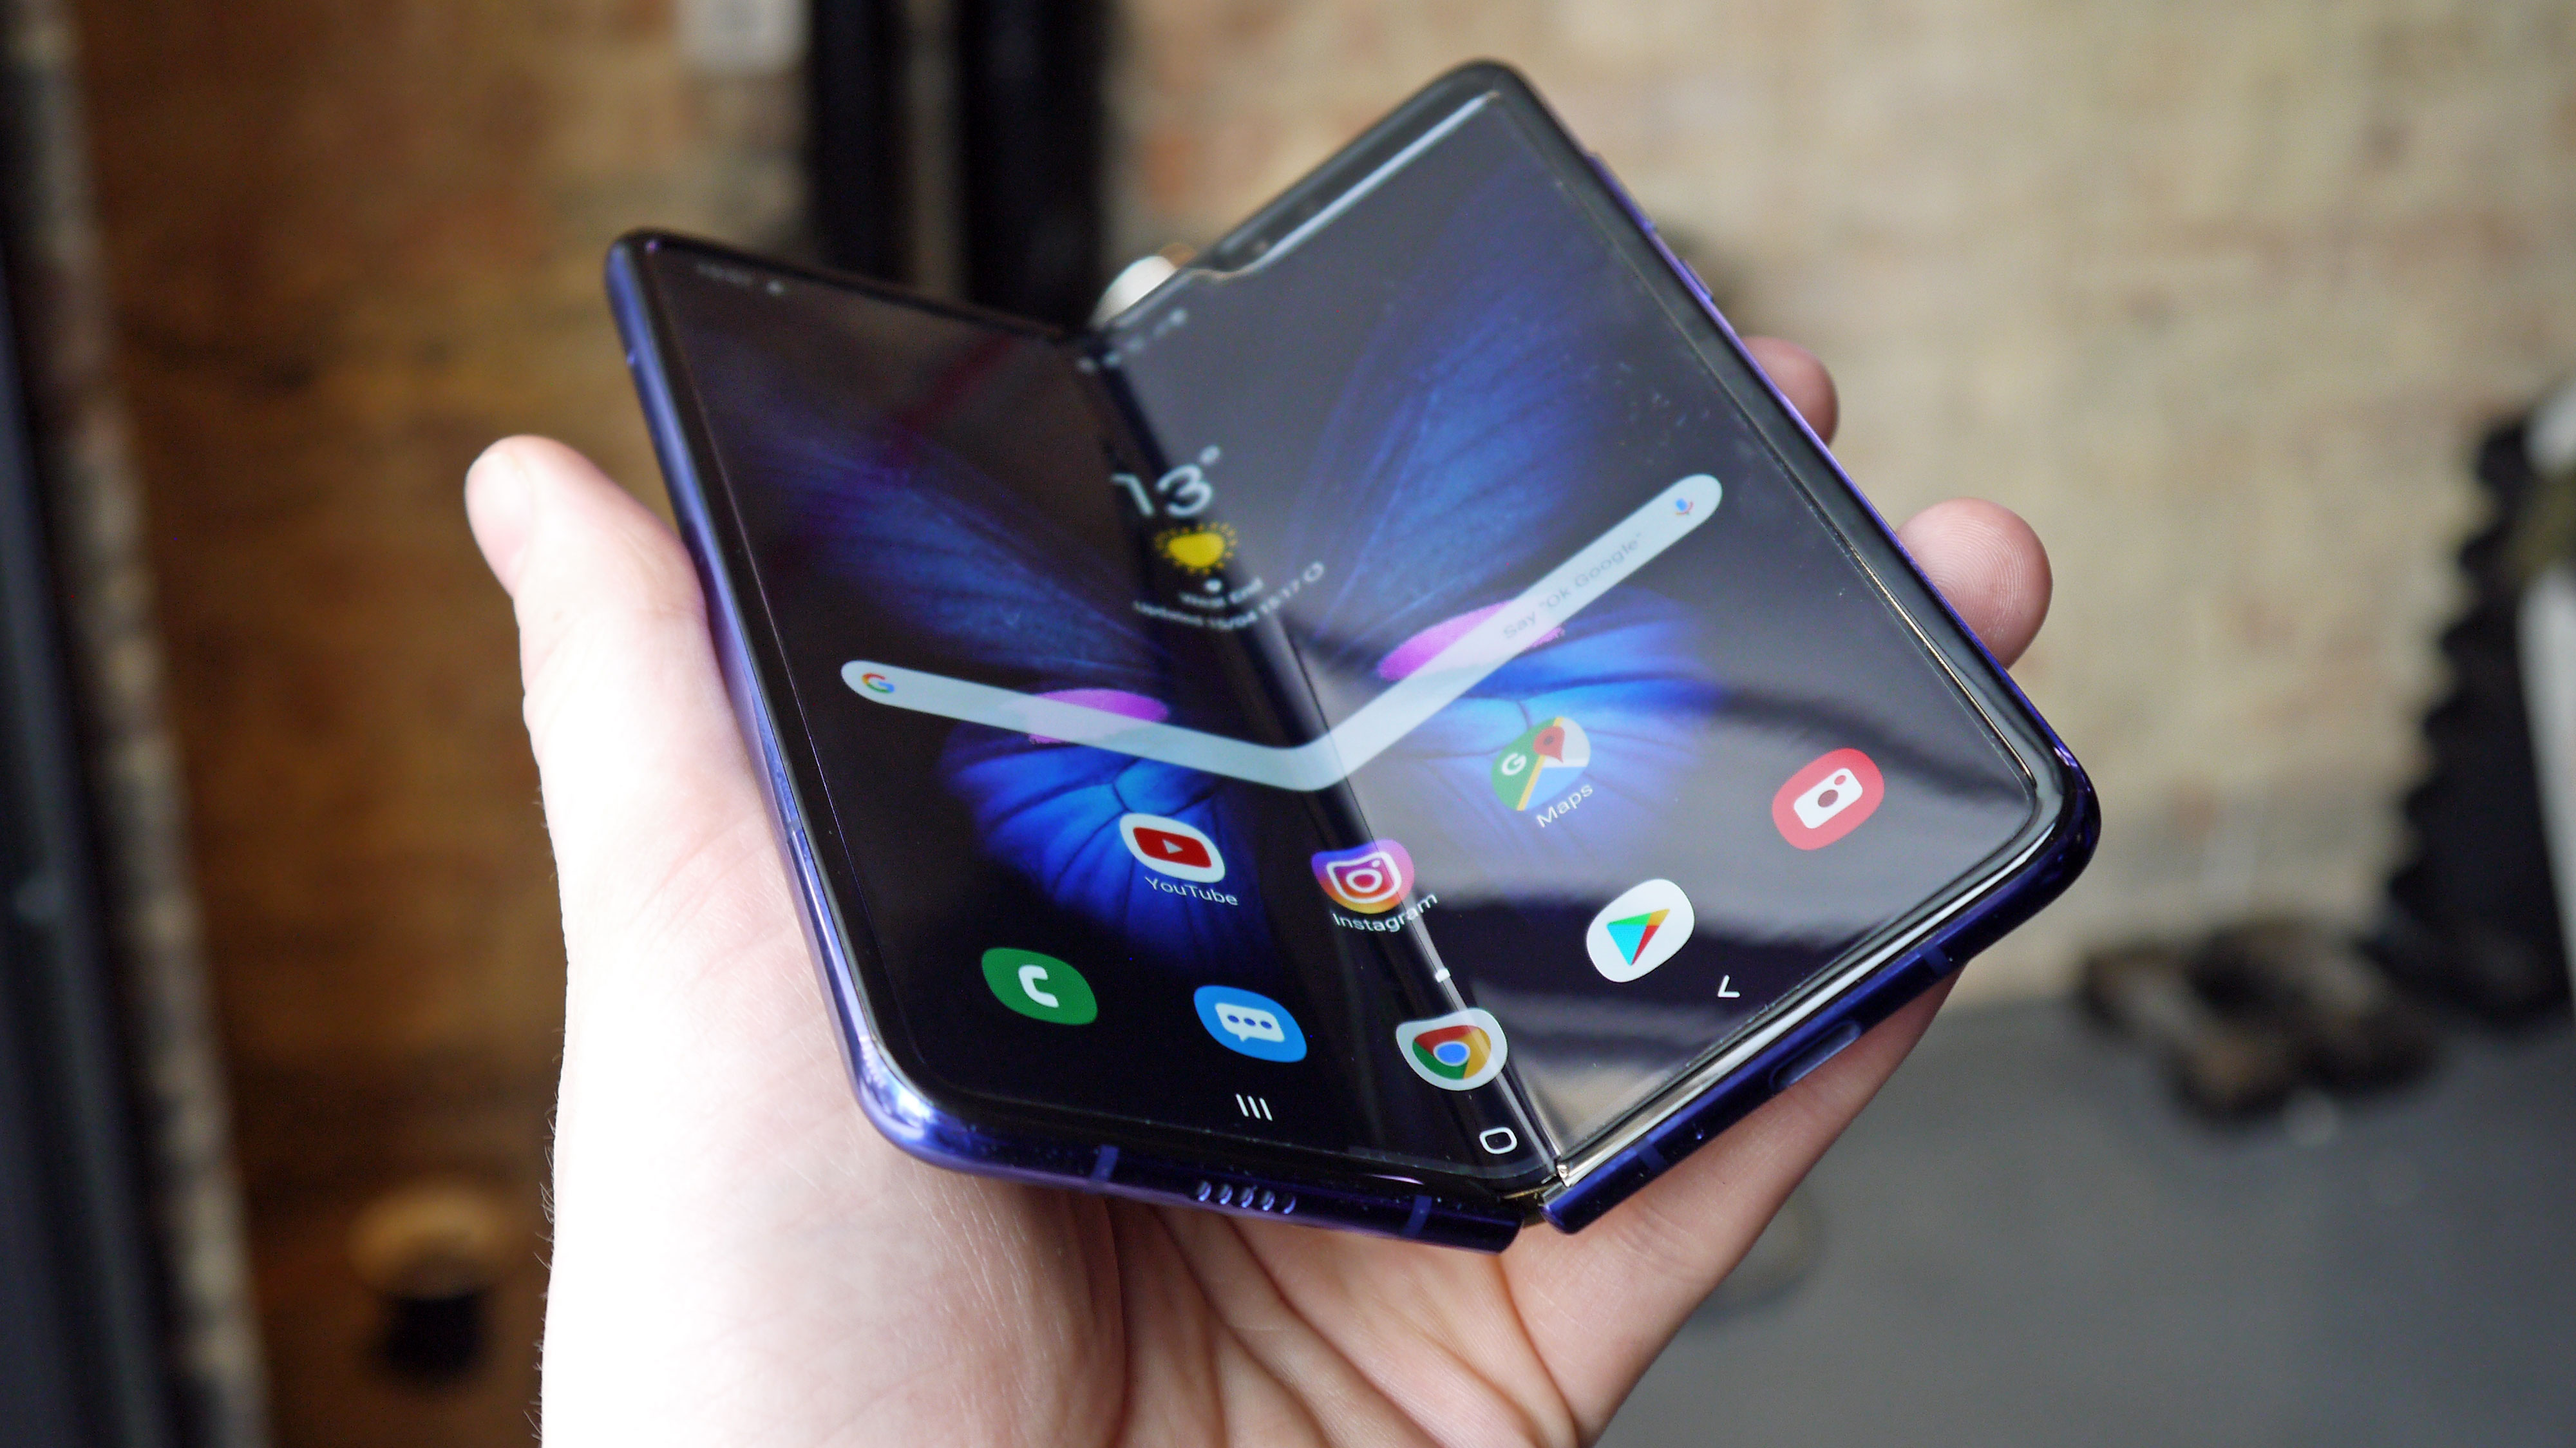 Samsung could relaunch the Galaxy Fold alongside Note 10 series